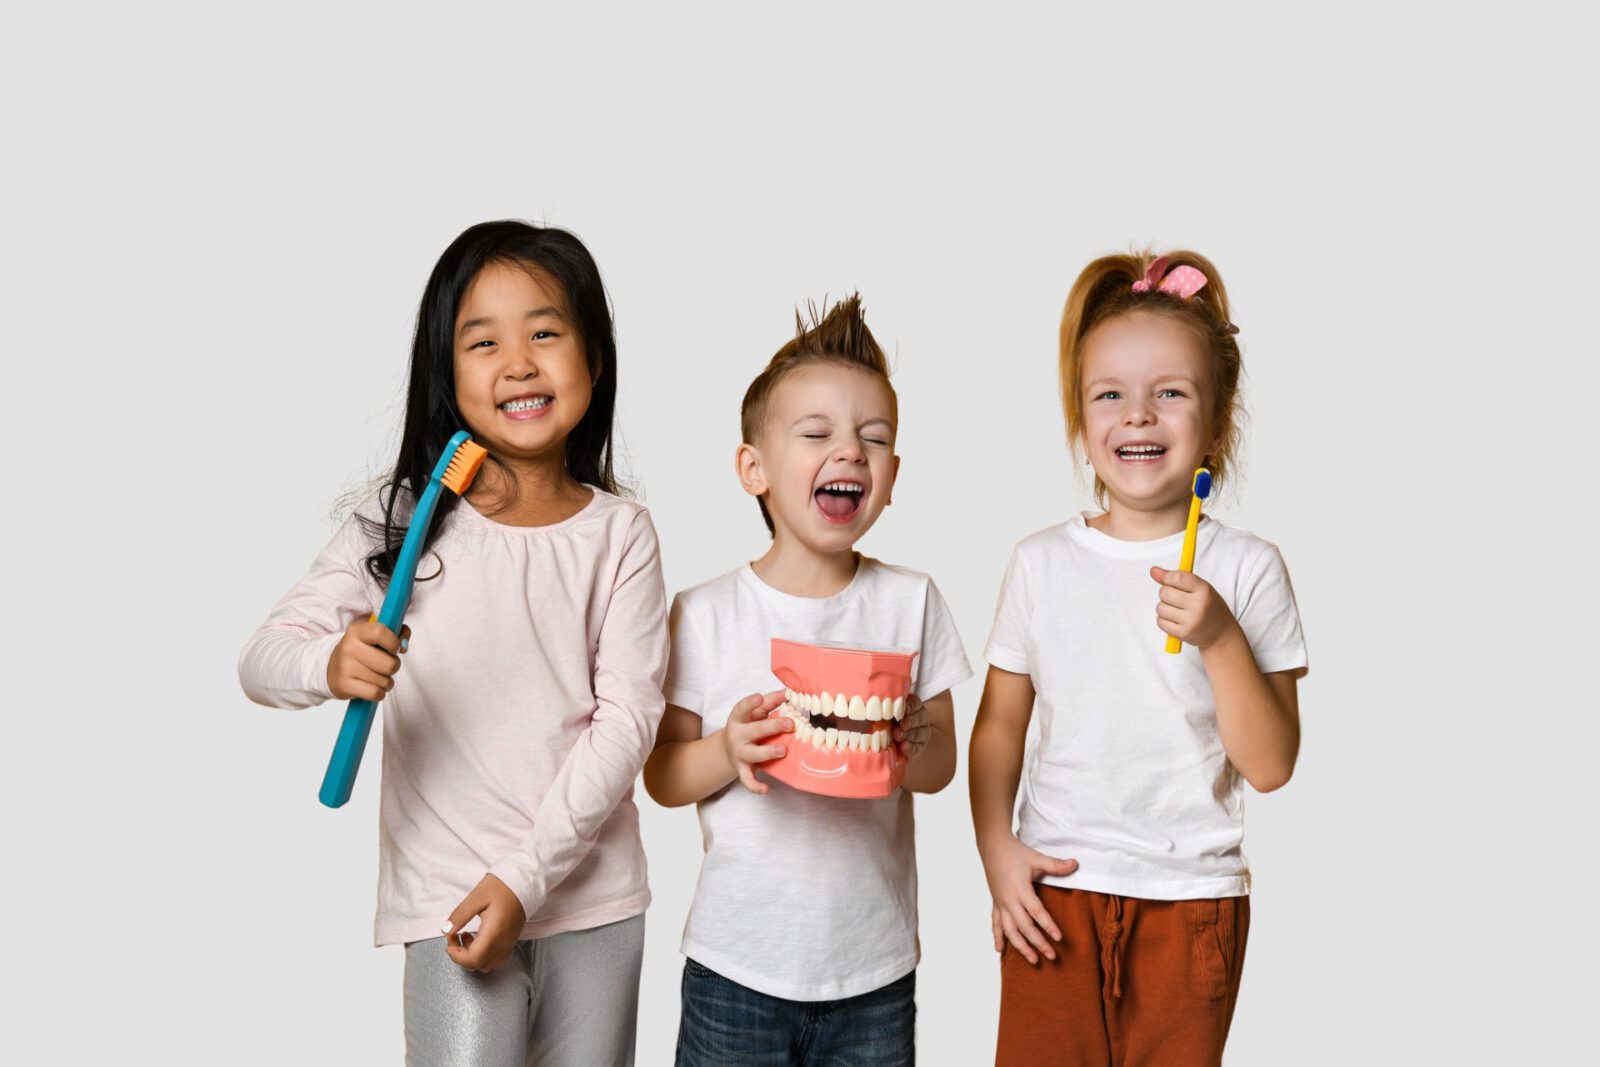 Three children are standing together holding toothbrushes and a model of teeth.